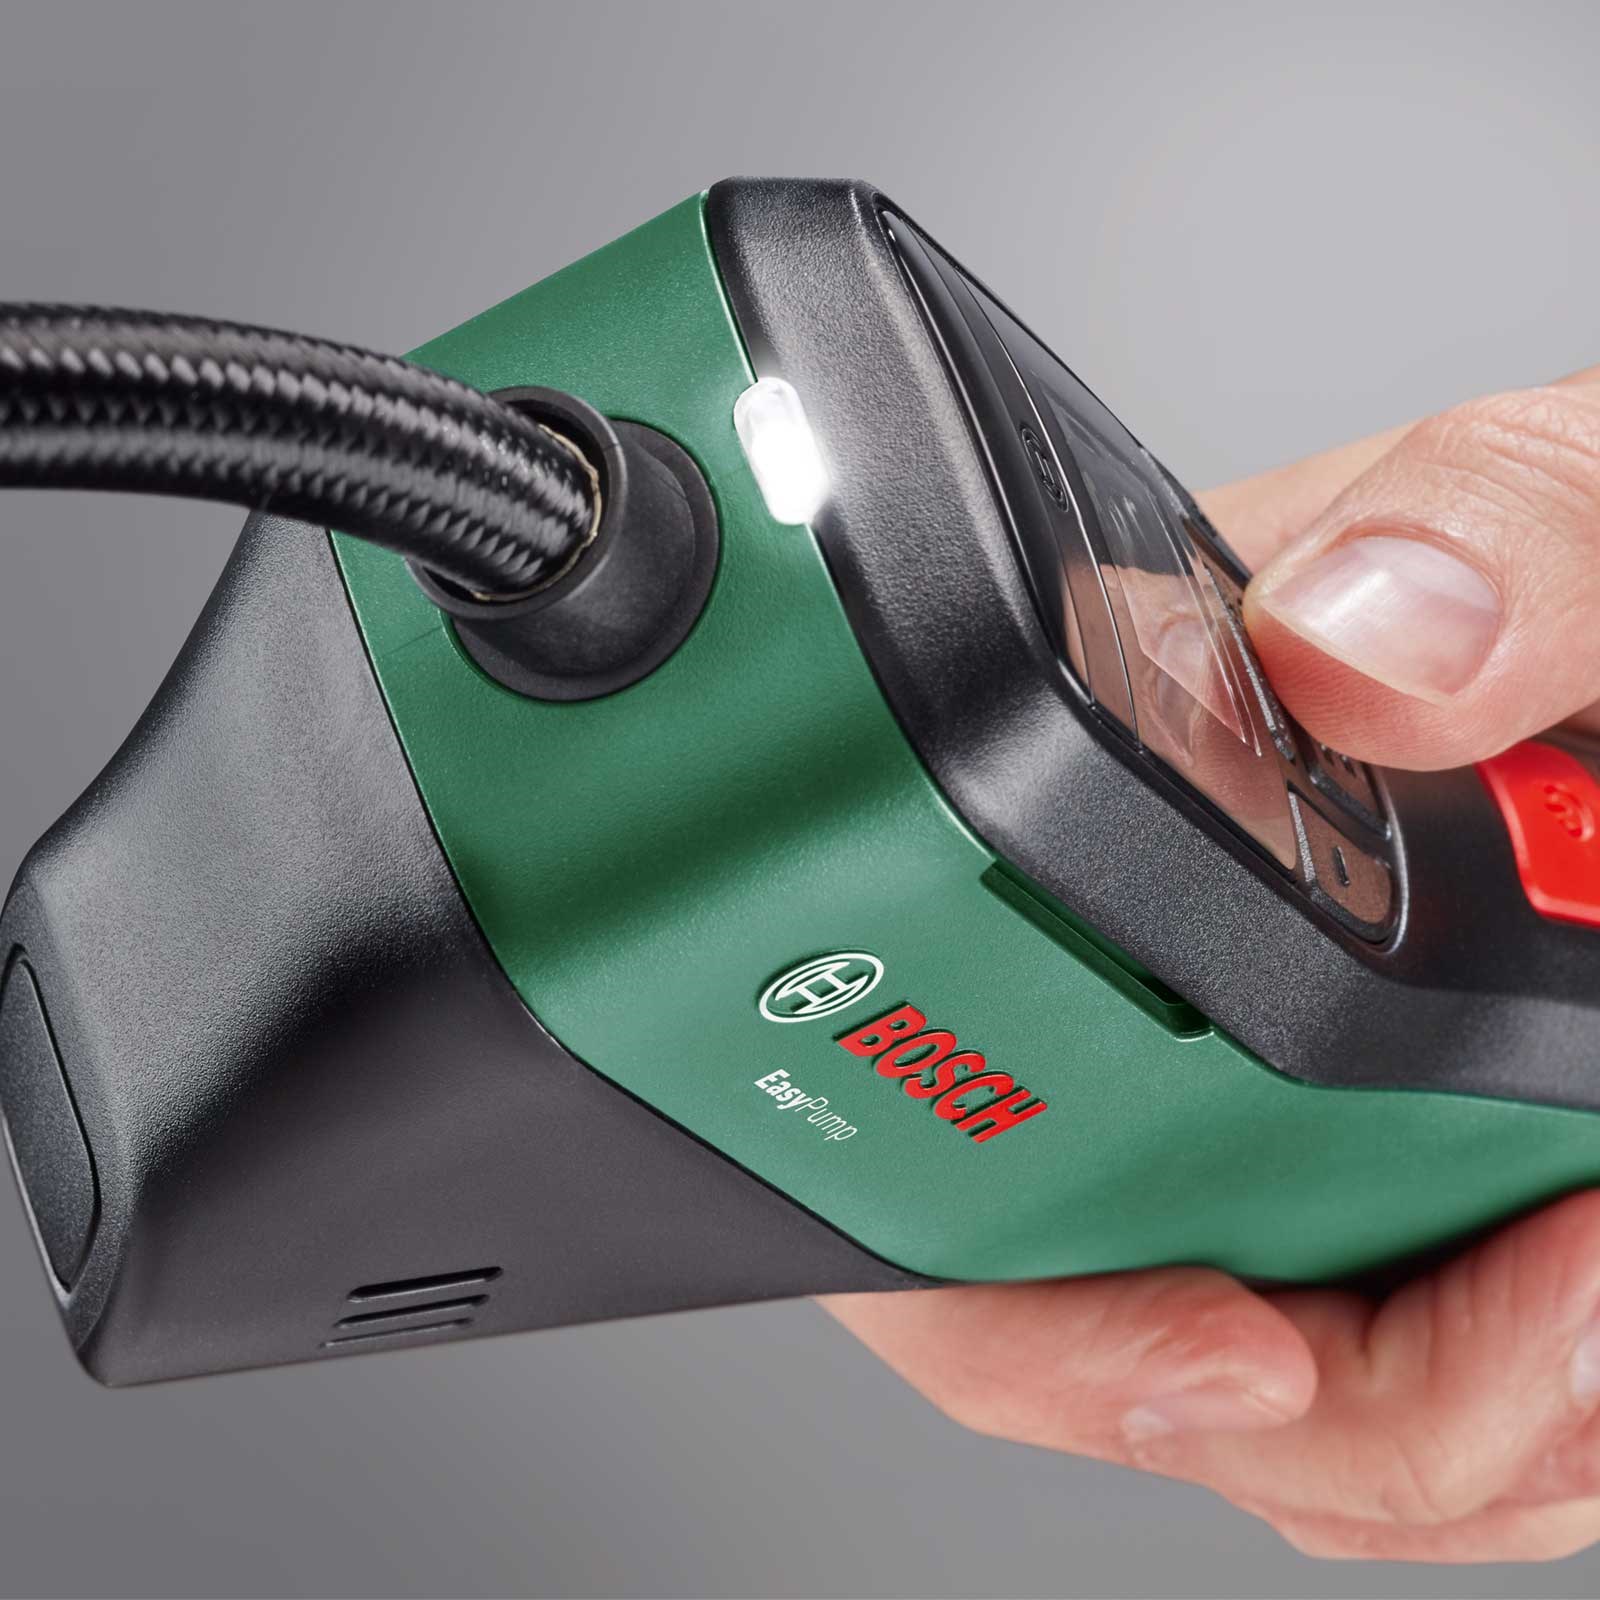 The Bosch EasyPump cordless compressor pump in the test Hurry up -  Velomotion